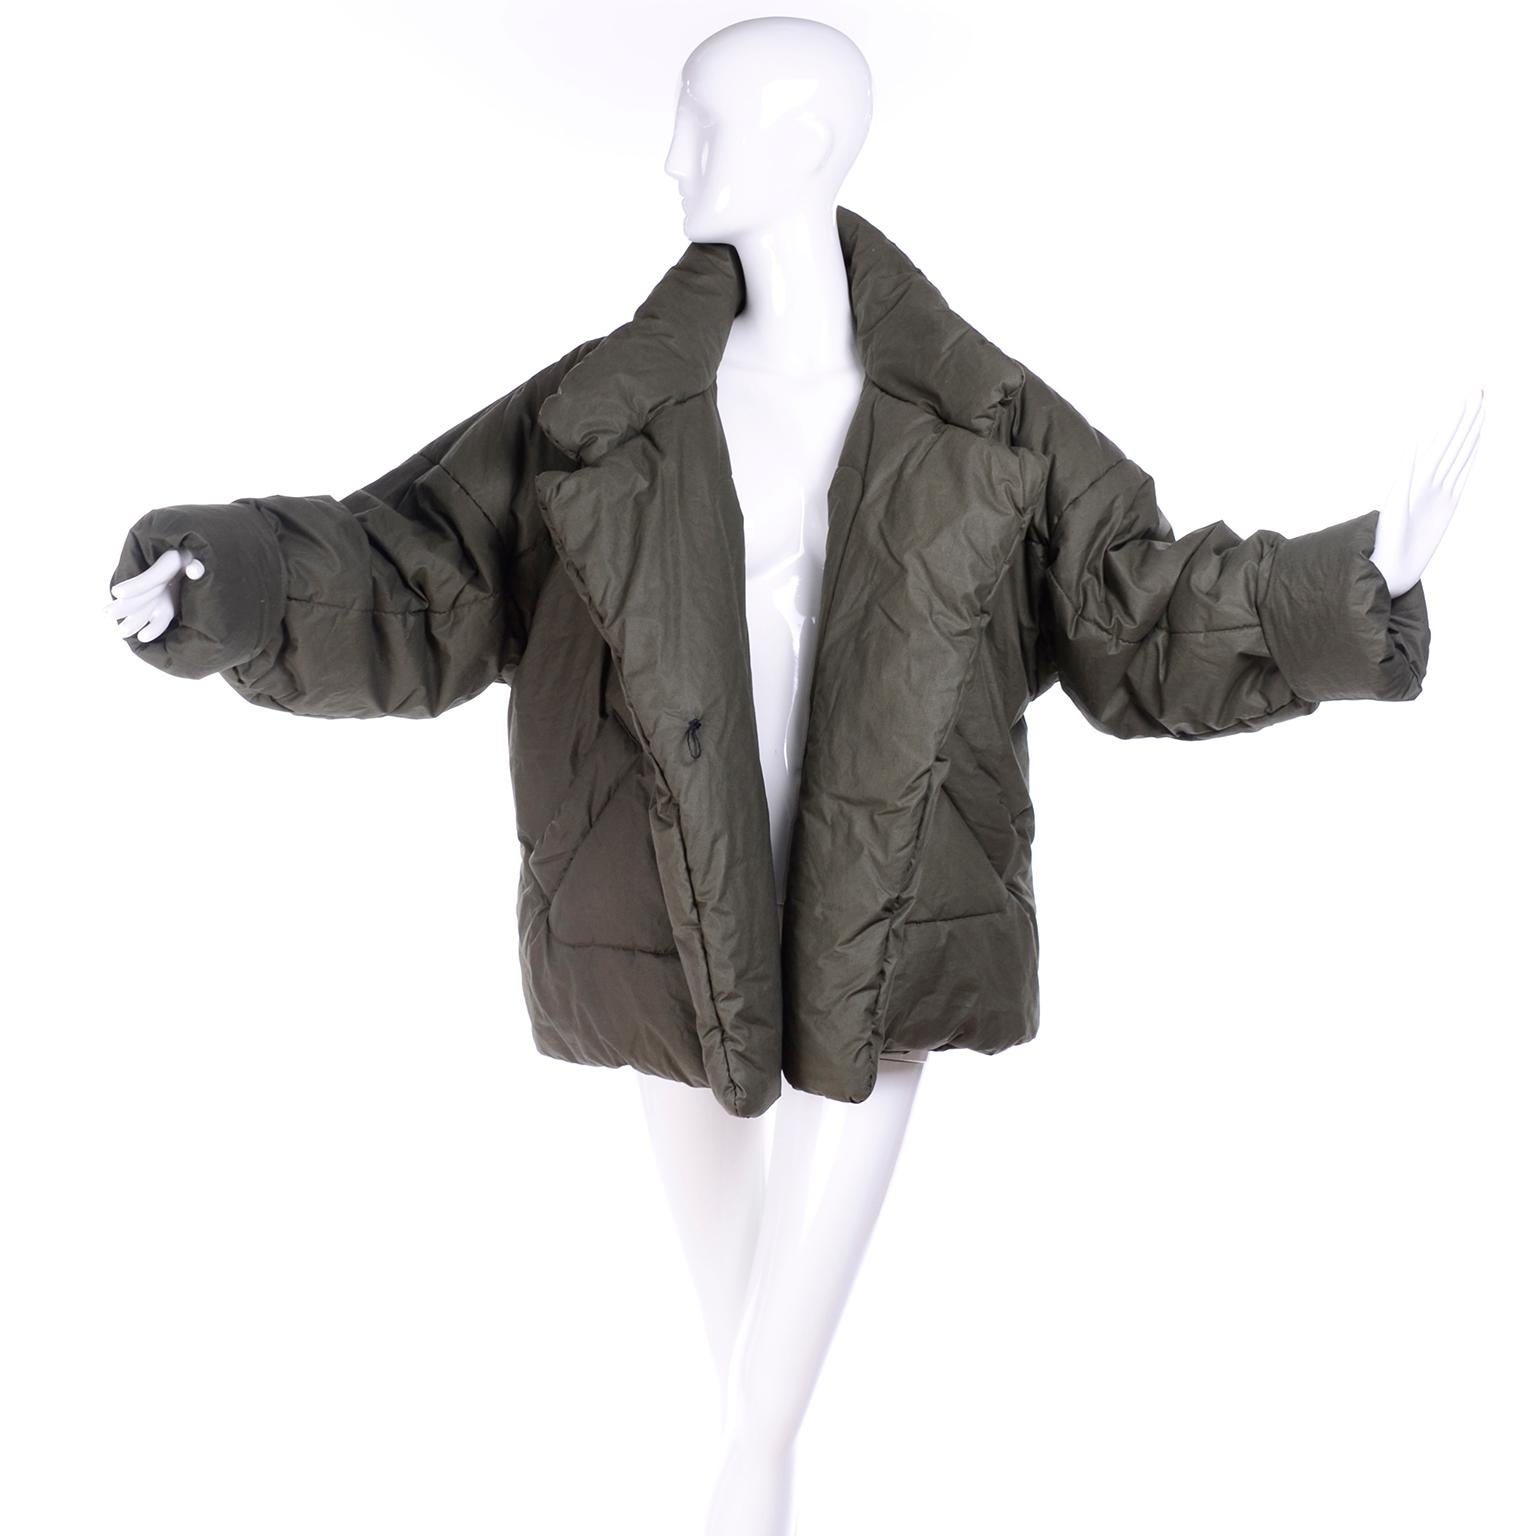 This is an iconic vintage Norma Kamali puffer coat in a great shade of army green. This vintage 1980's coat has the older OMO label. Norma Kamali originally designed these coats when she went camping and found that she would wrap herself in her